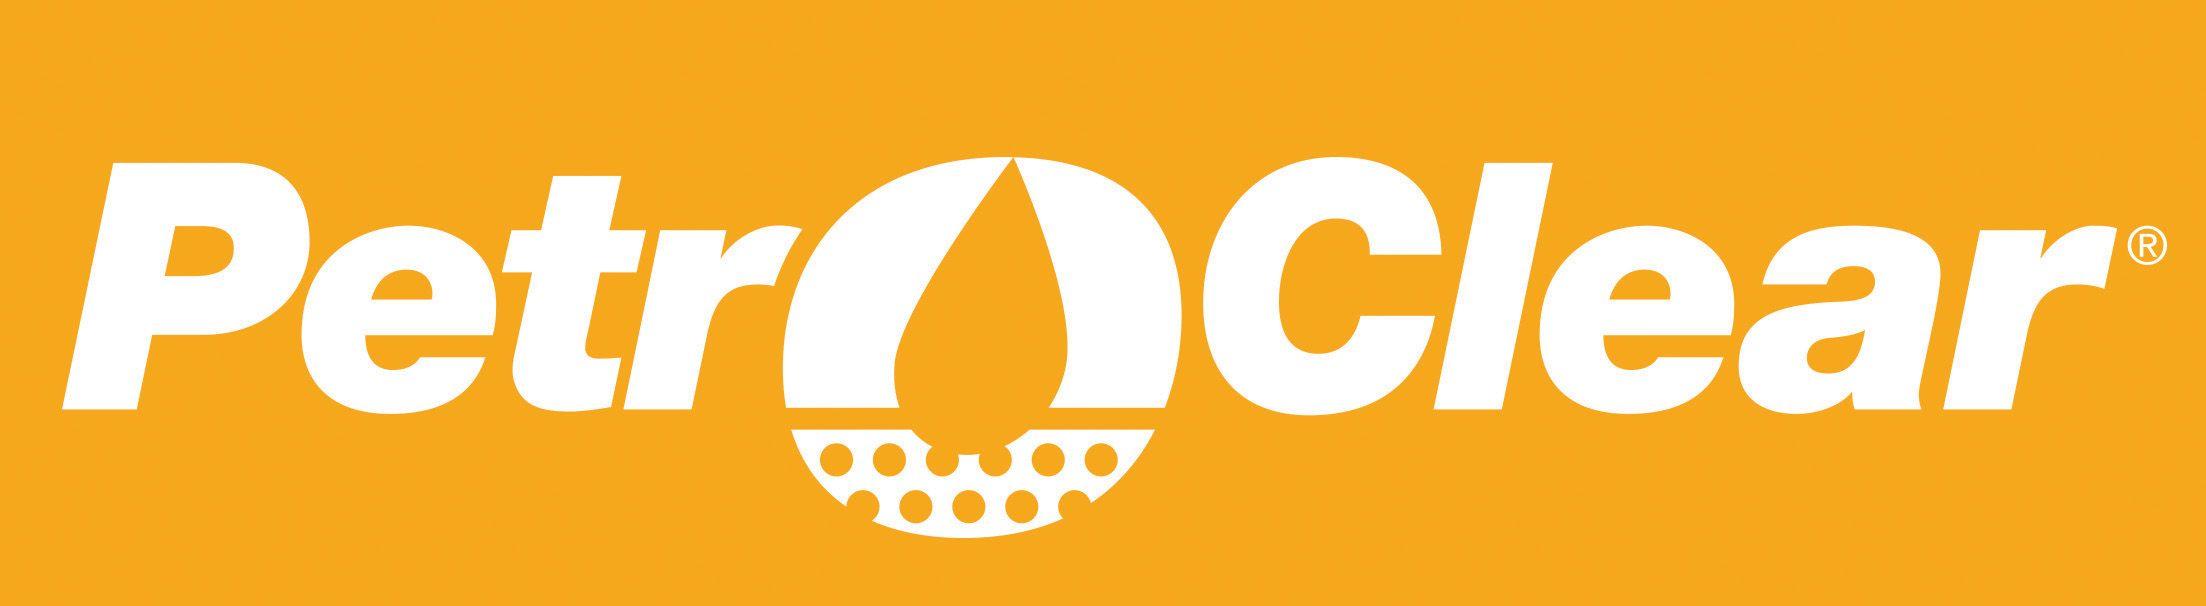 Orange Yellow and White Logo - PetroClear - About PetroClear's Corporate Identity